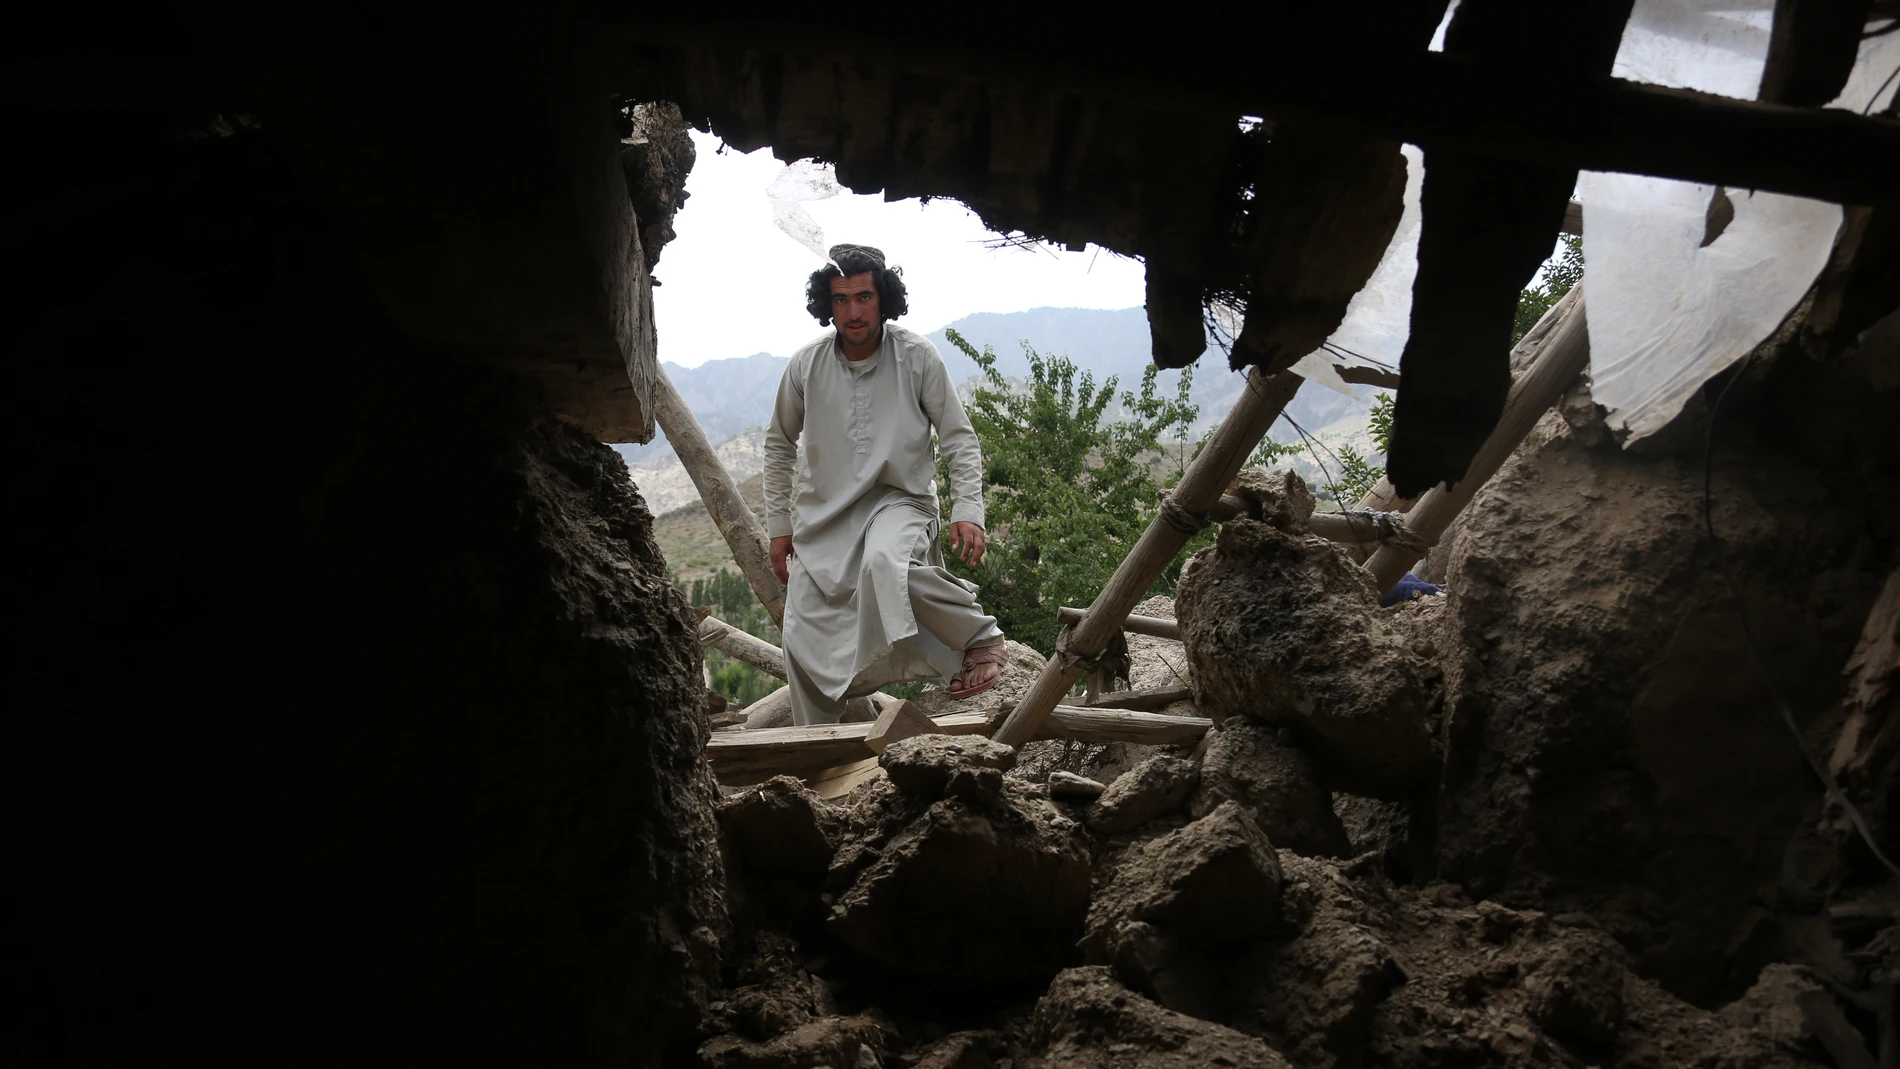 PAKTIKA, July 1, 2022 -- A man is seen near the rubble of a house damaged in an earthquake in Paktika province, Afghanistan on June 28, 2022. Thousands of families have been left homeless following a devastating quake that struck the Gayan district of Afghanistan's eastern Paktika province on June 22. The quake victims are appealing for support to rebuilding their houses. TO GO WITH "Feature: Quake-affected Afghan families in dire need of support for rebuilding houses" (Foto de ARCHIVO) ...